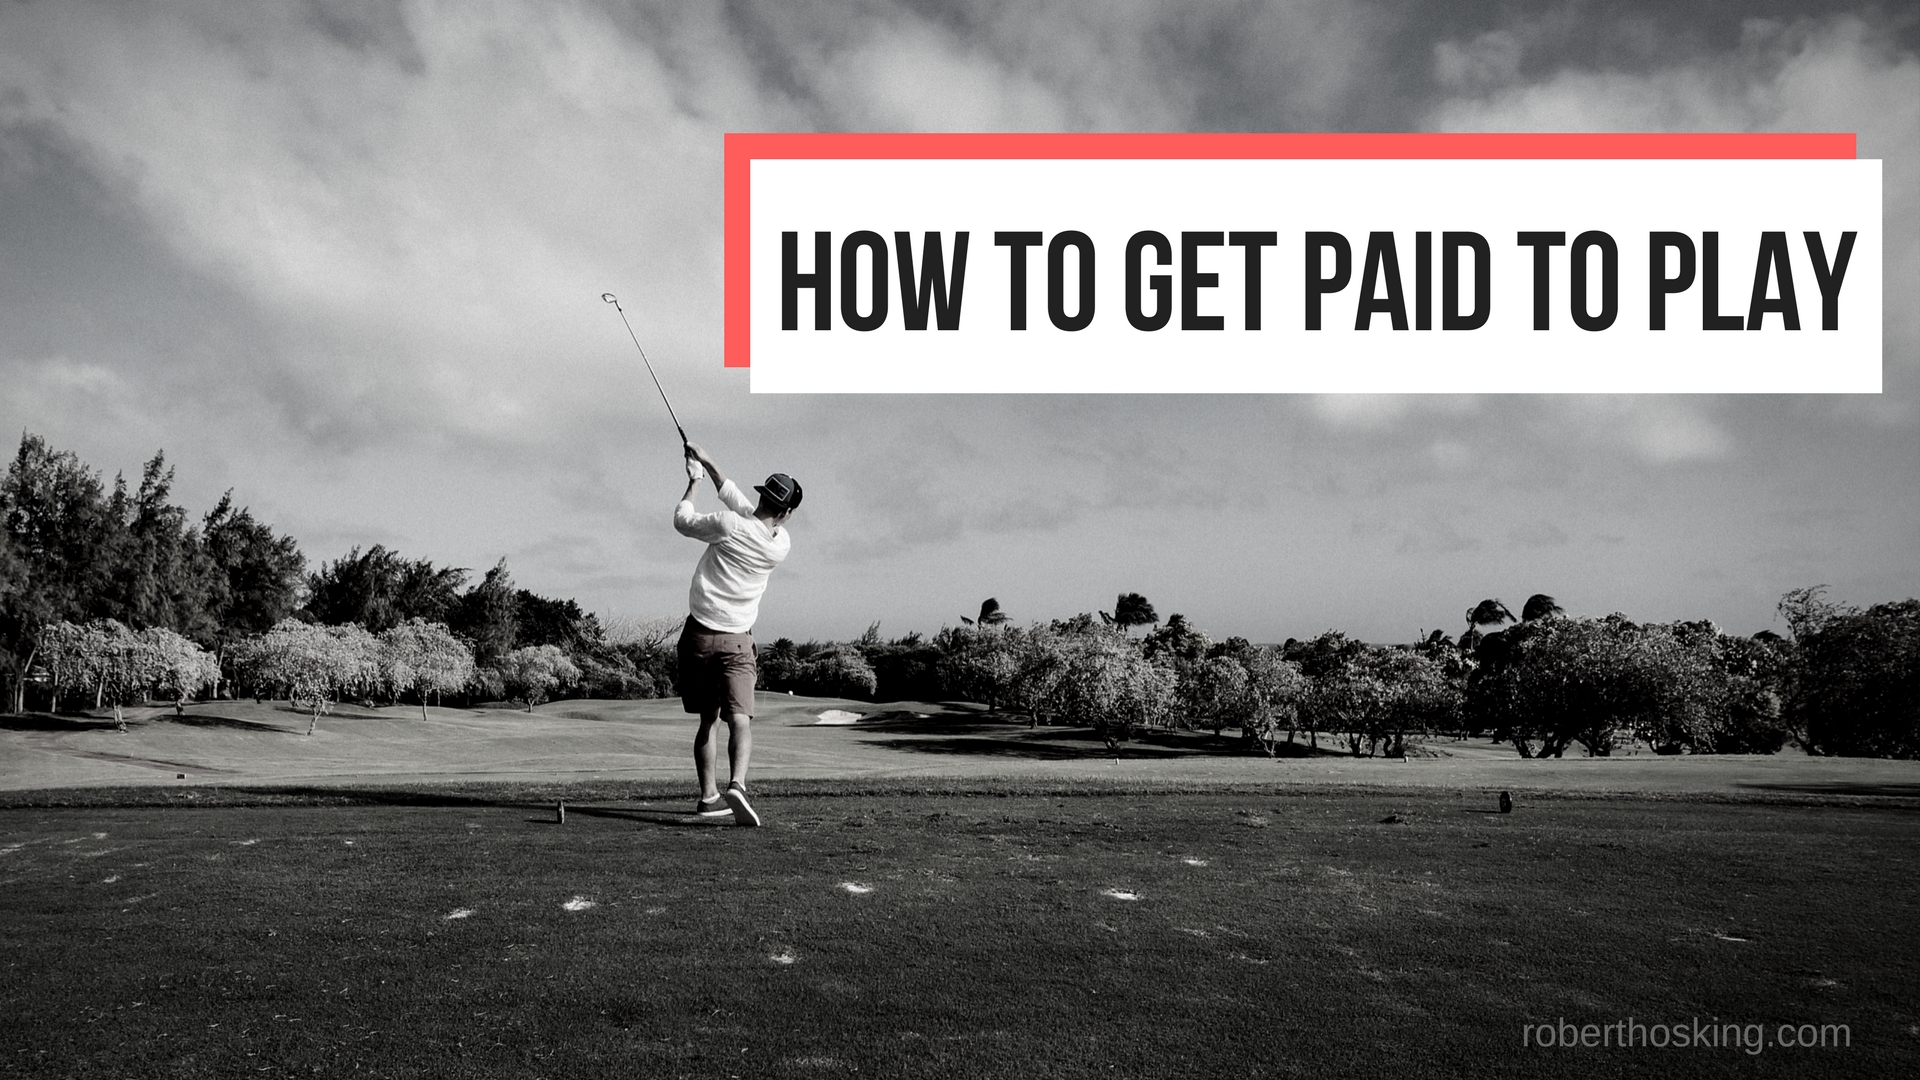 How to Get Paid to Play